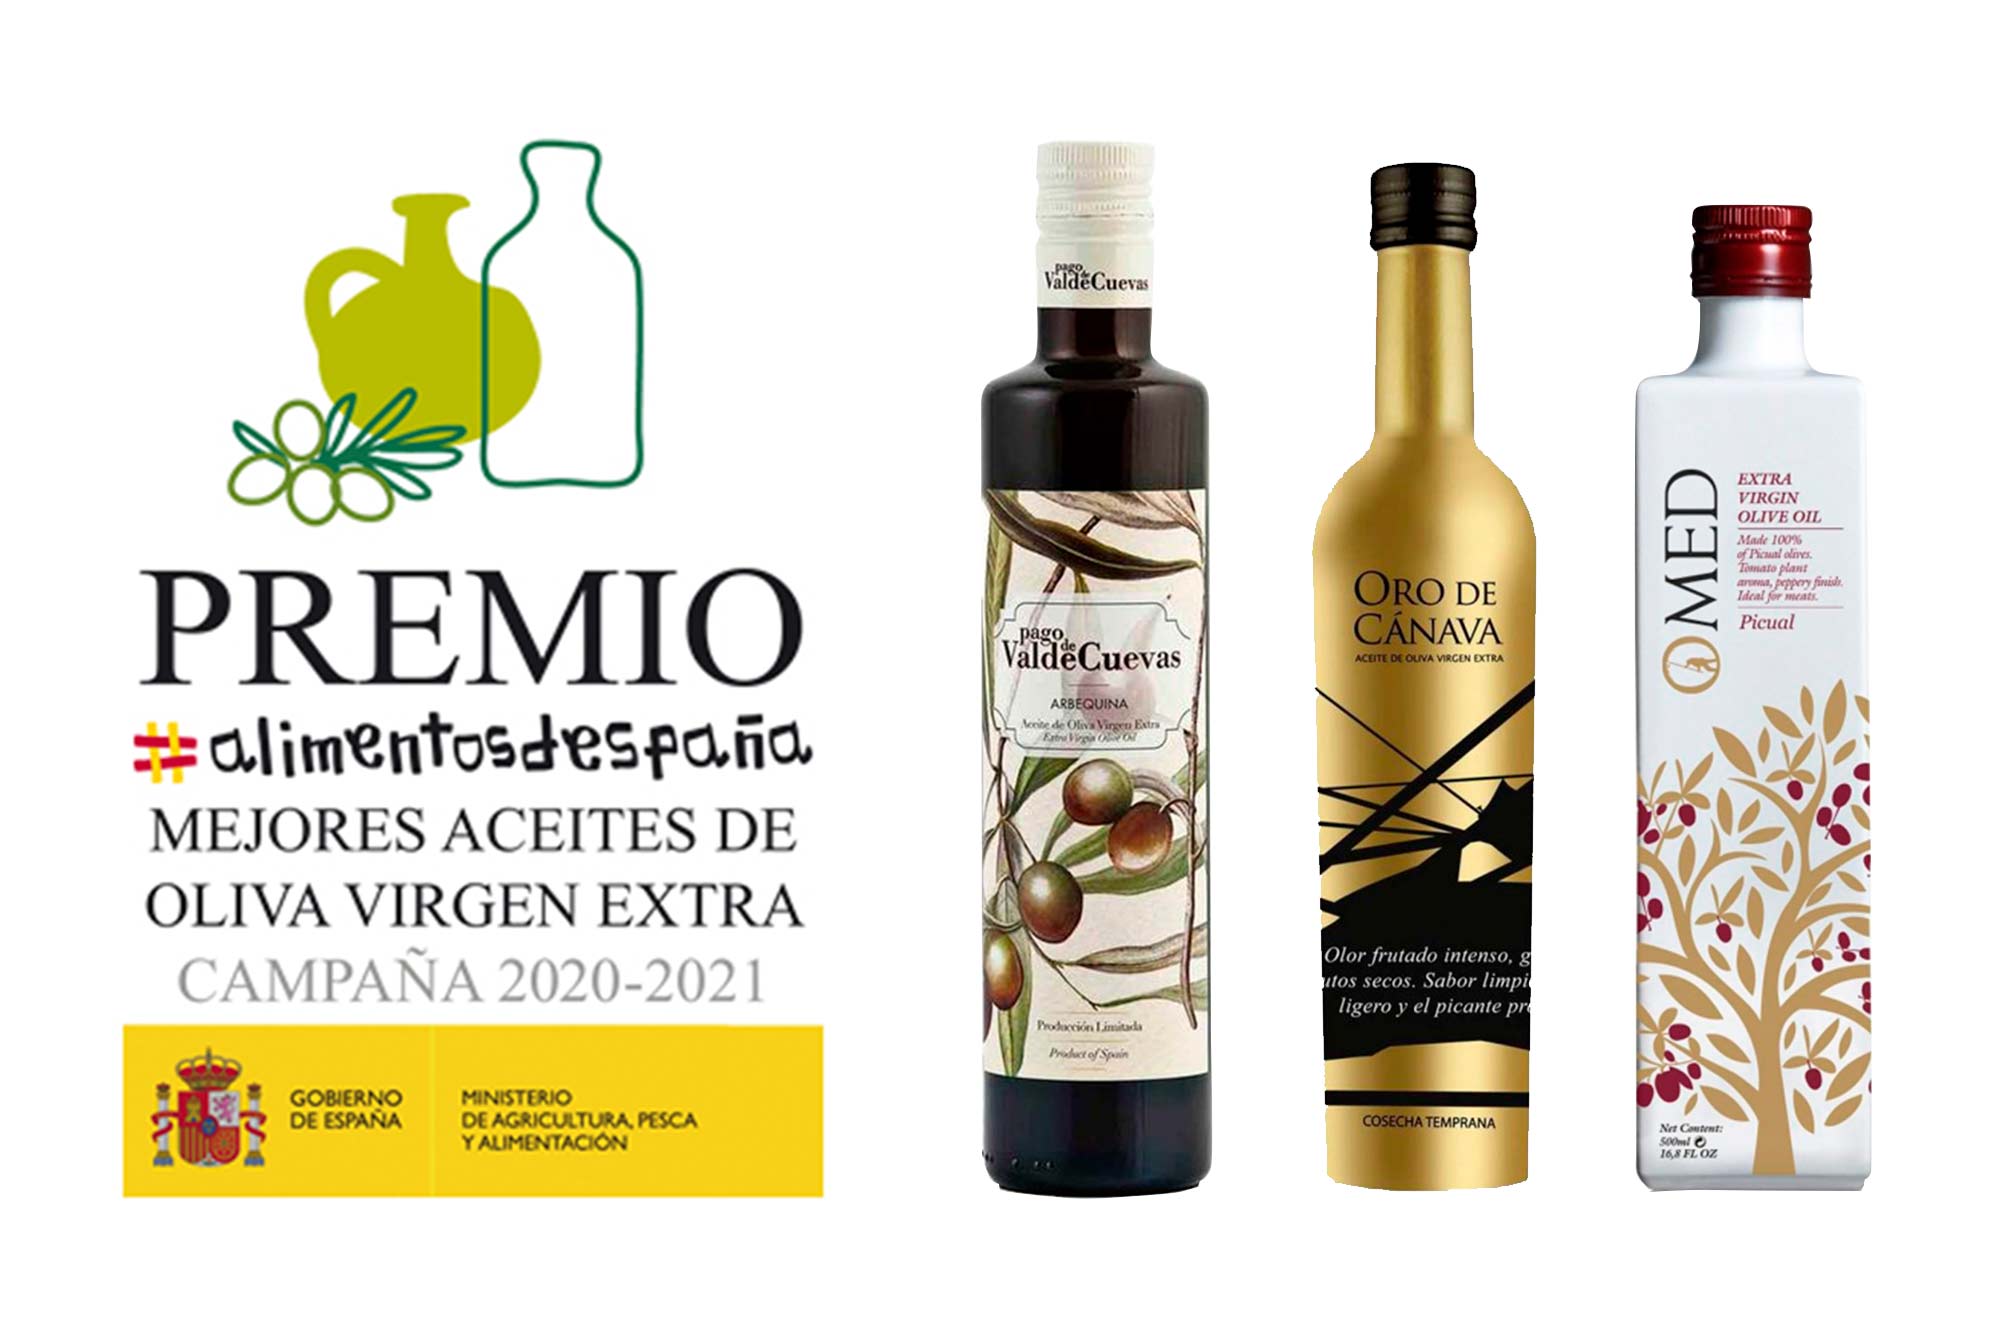 The three best Olive oils from Spain | Torrent closures